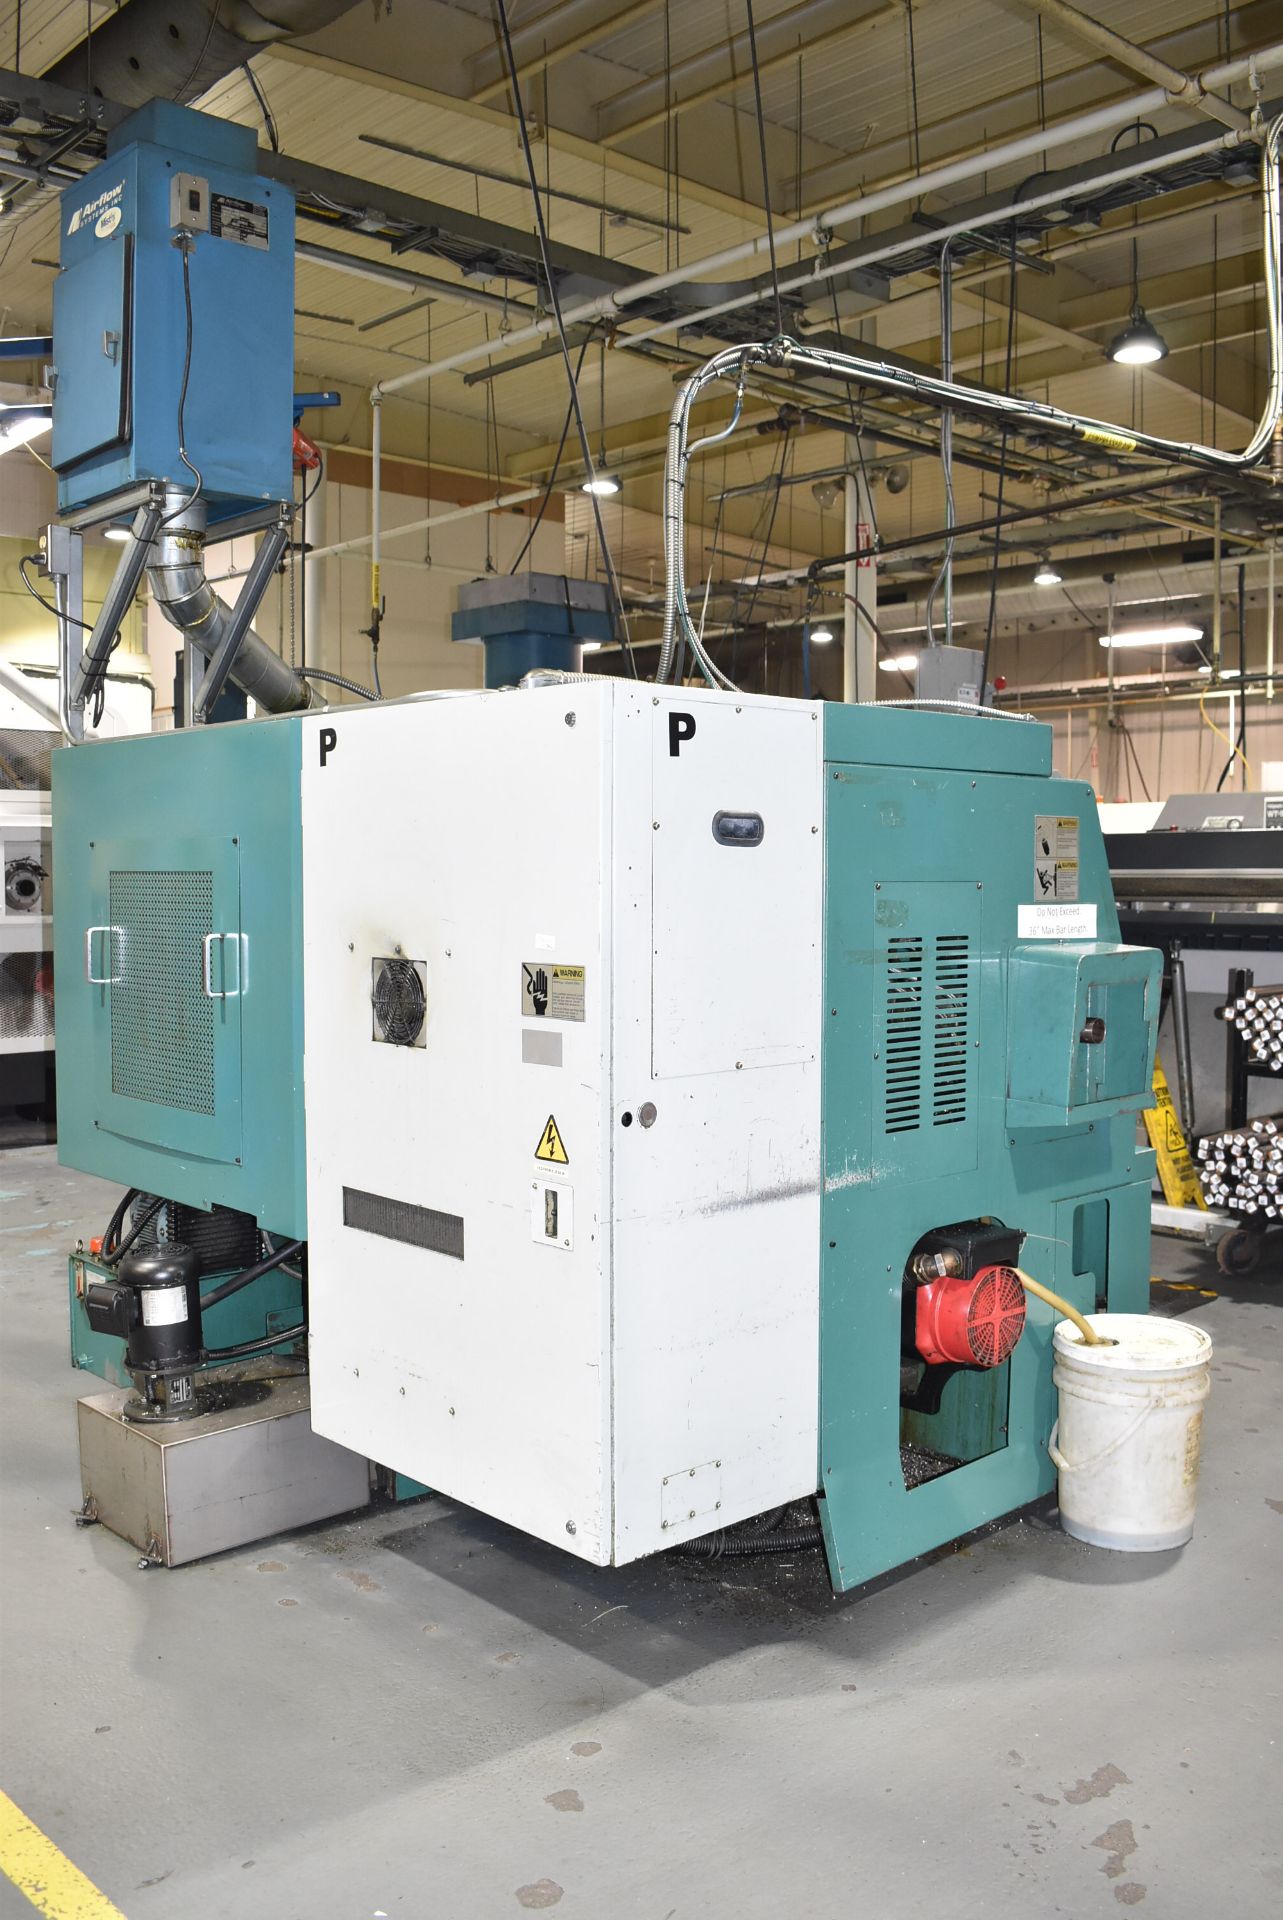 NAKAMURA-TOME SC-150 OPPOSED-SPINDLE CNC TURNING AND LIVE MILLING CENTER WITH FANUC SERIES 18I-T CNC - Image 11 of 13